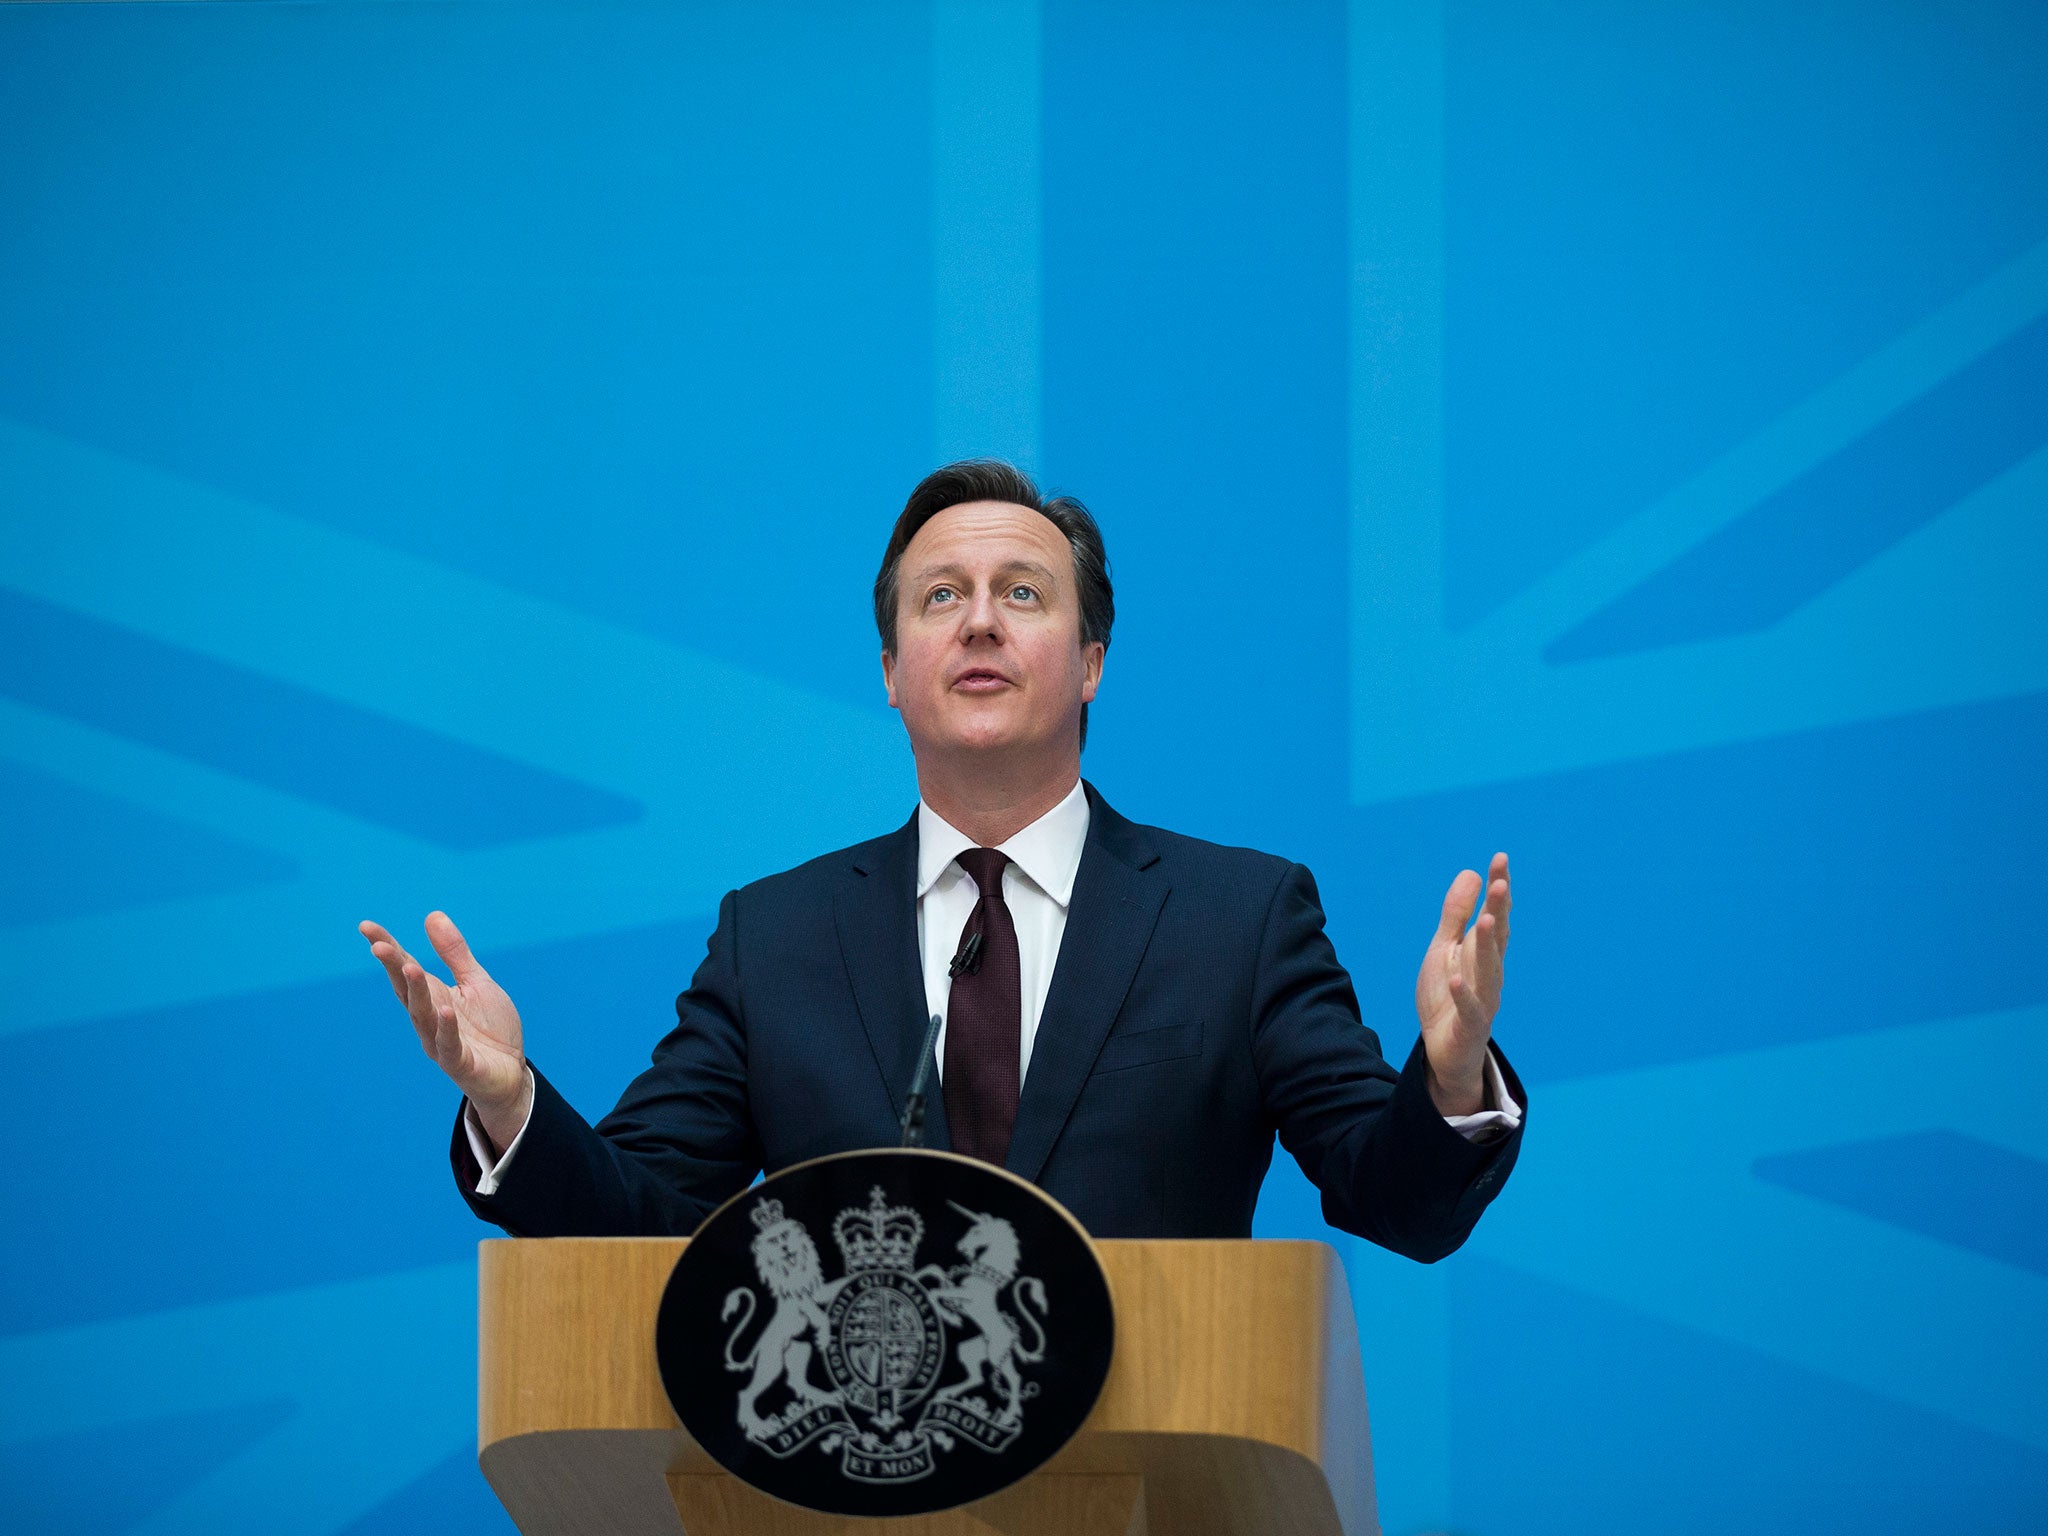 David Cameron speaking at the Home Office